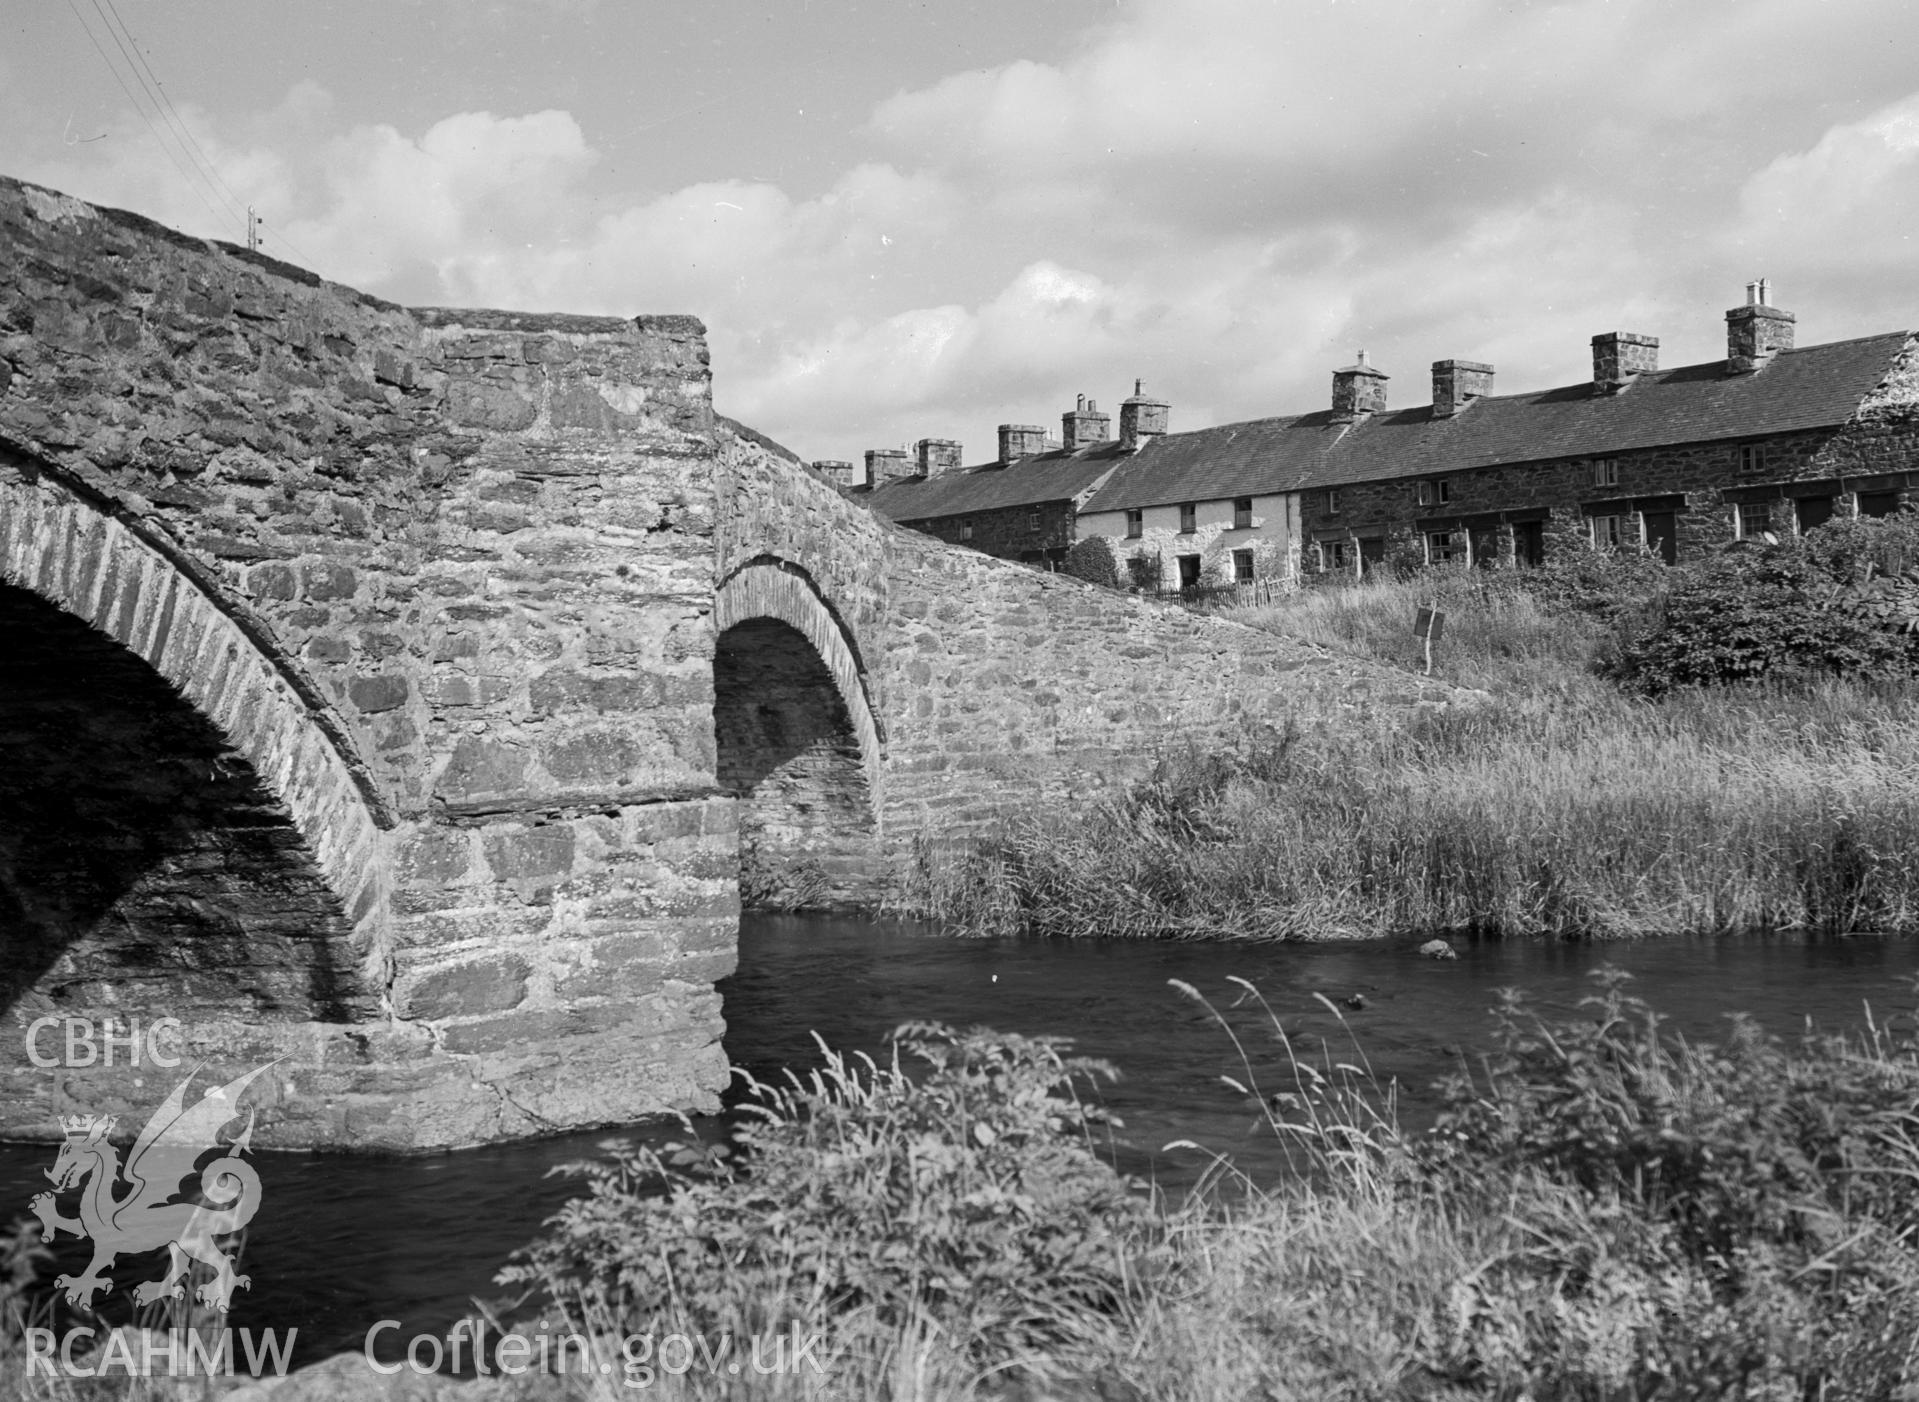 Black and white photographic survey of Pont Yspytty-ifan, Ysbyty Ifan, produced by George Bernard Mason as part of the National Buildings Record